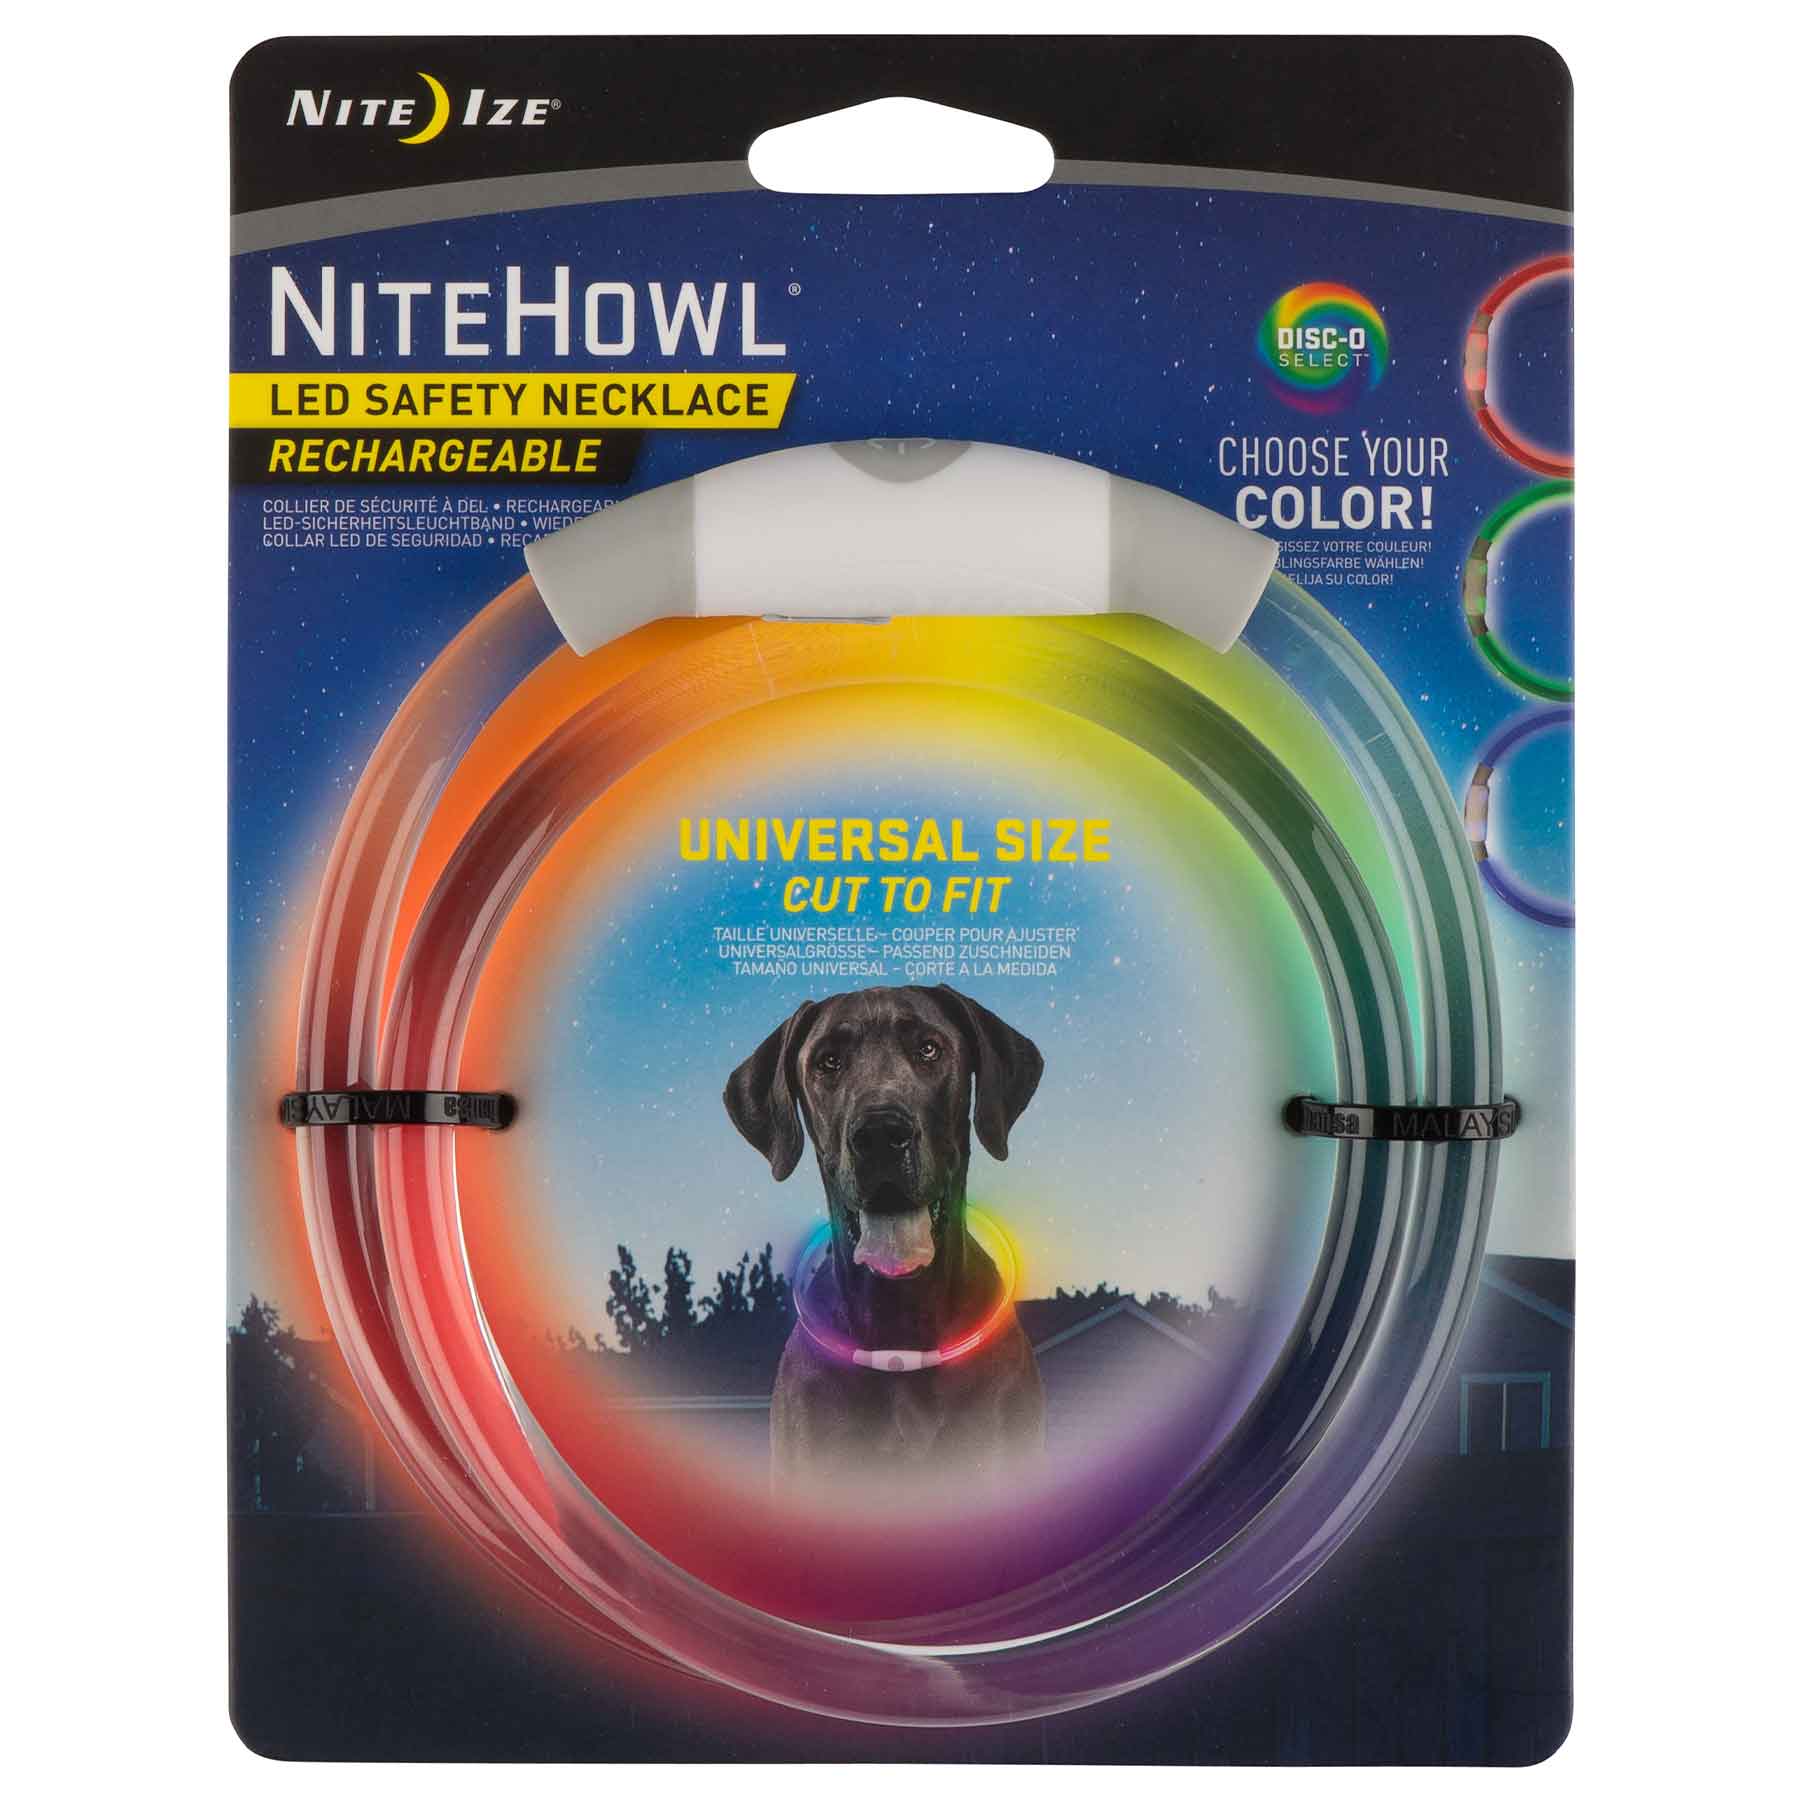 Nite Ize NiteHowl Rechargeable Disc-O Select LED Safety Necklace (2 Sizes)